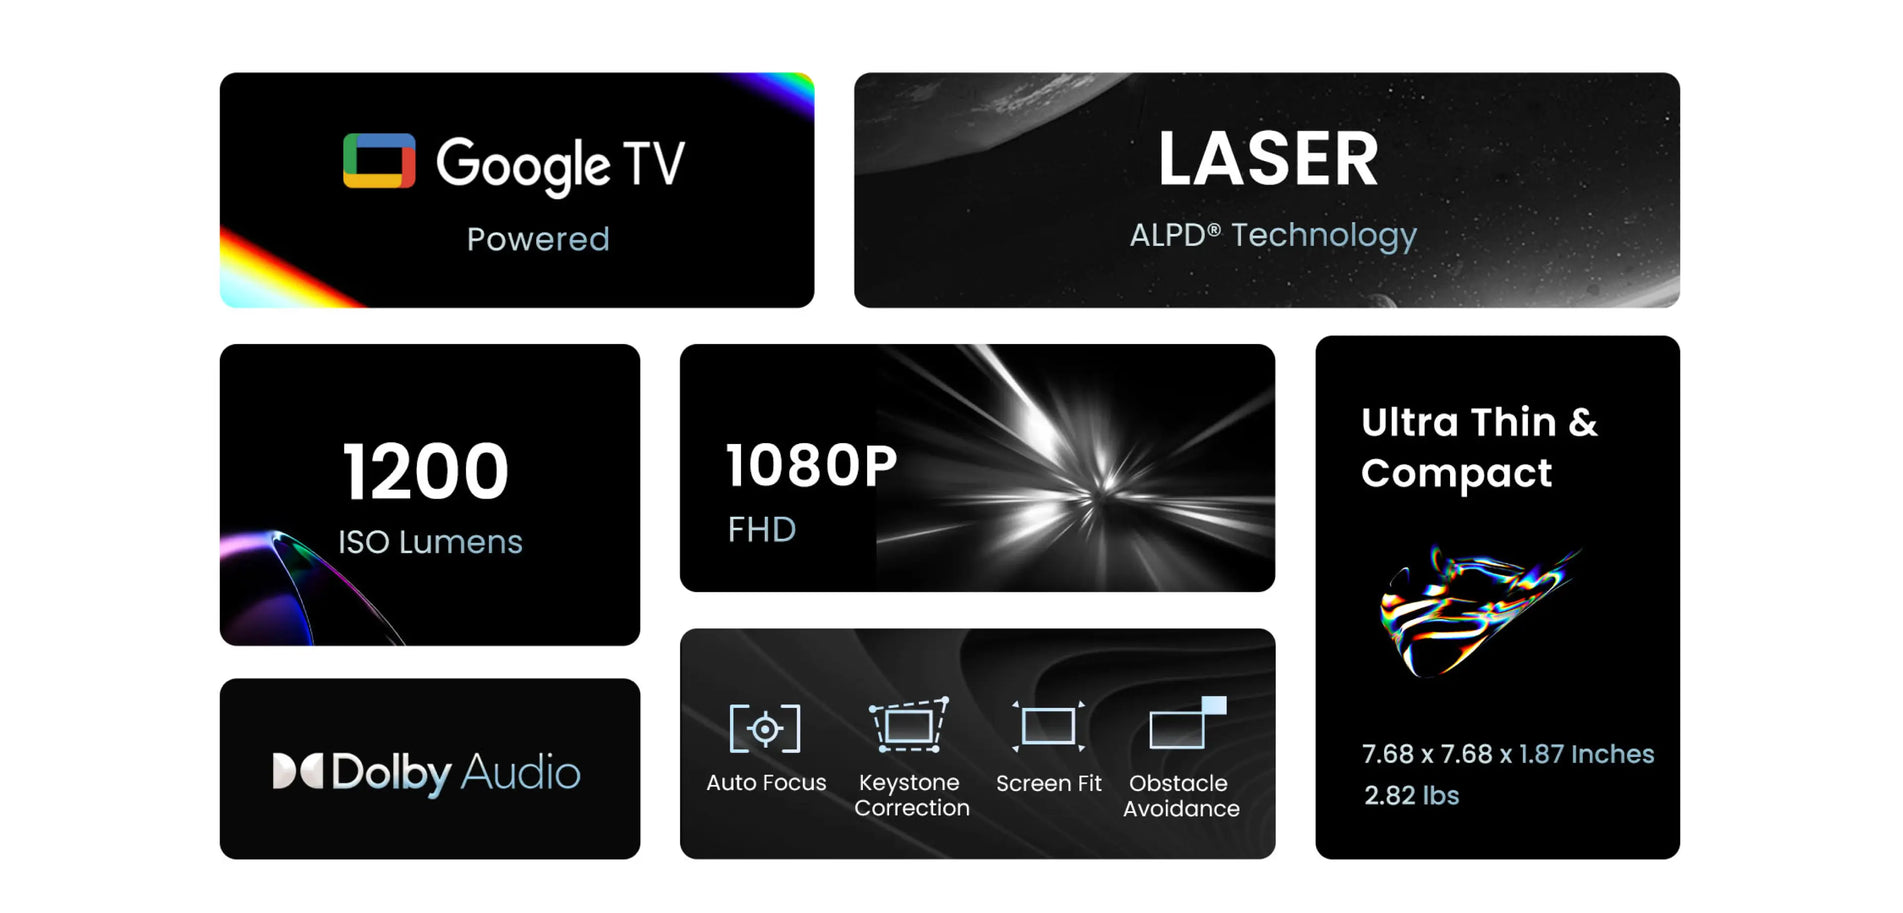 Google TV powered 4K projector with ALPD technology, 1200 ISO lumens brightness, 1080P full HD, ultra-thin and compact design, Dolby Audio, auto-focus, keystone correction, and obstacle avoidance features